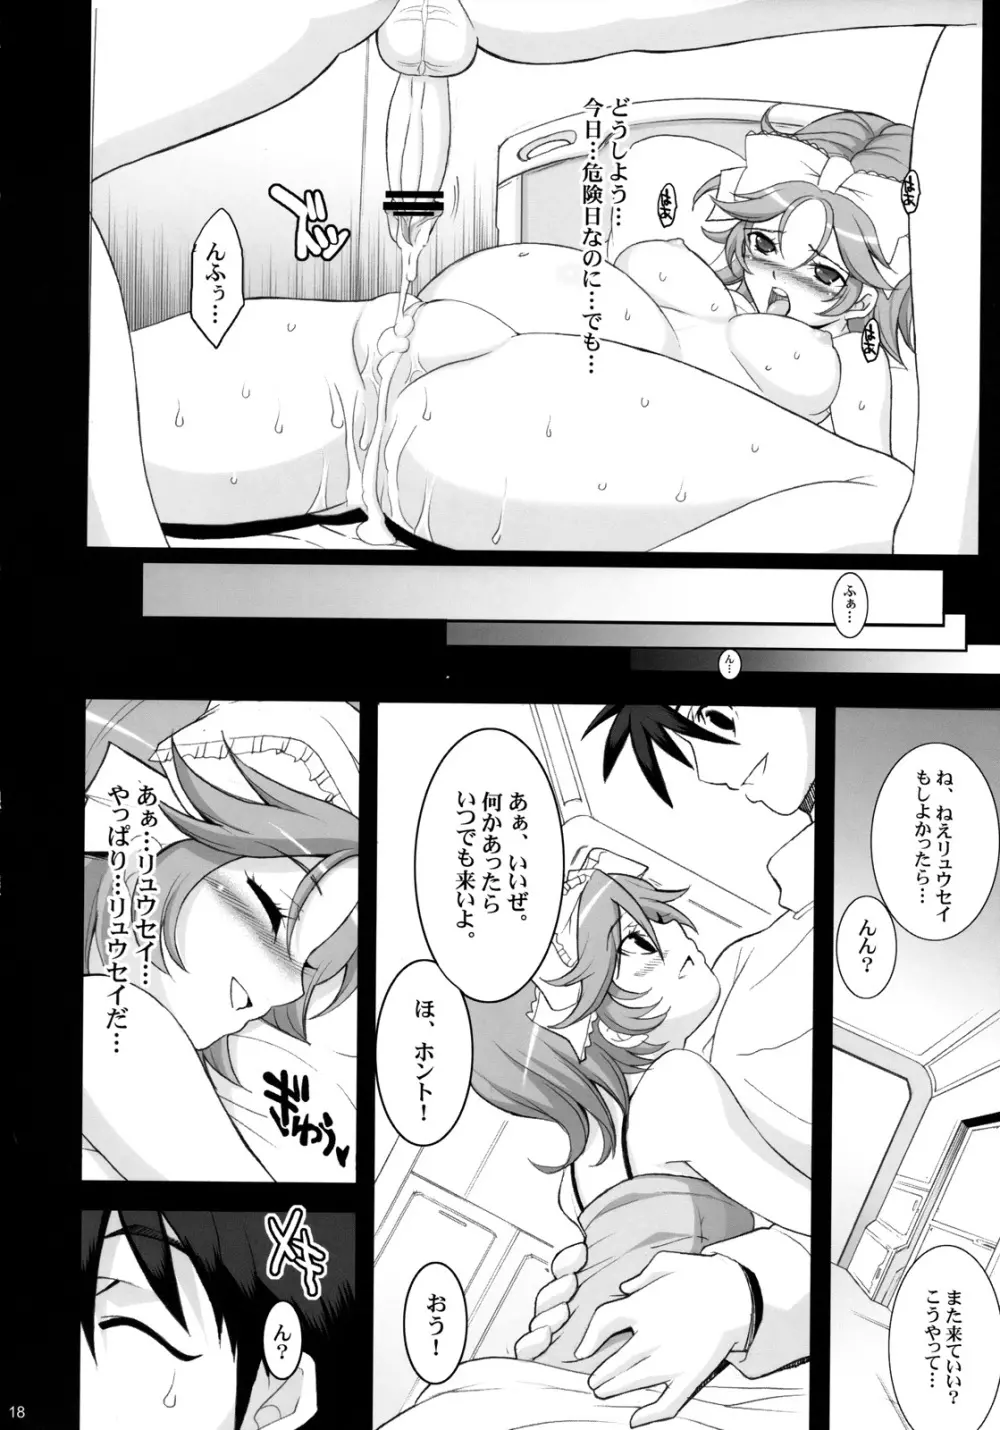 PRETTY HEROINES 2 Page.17